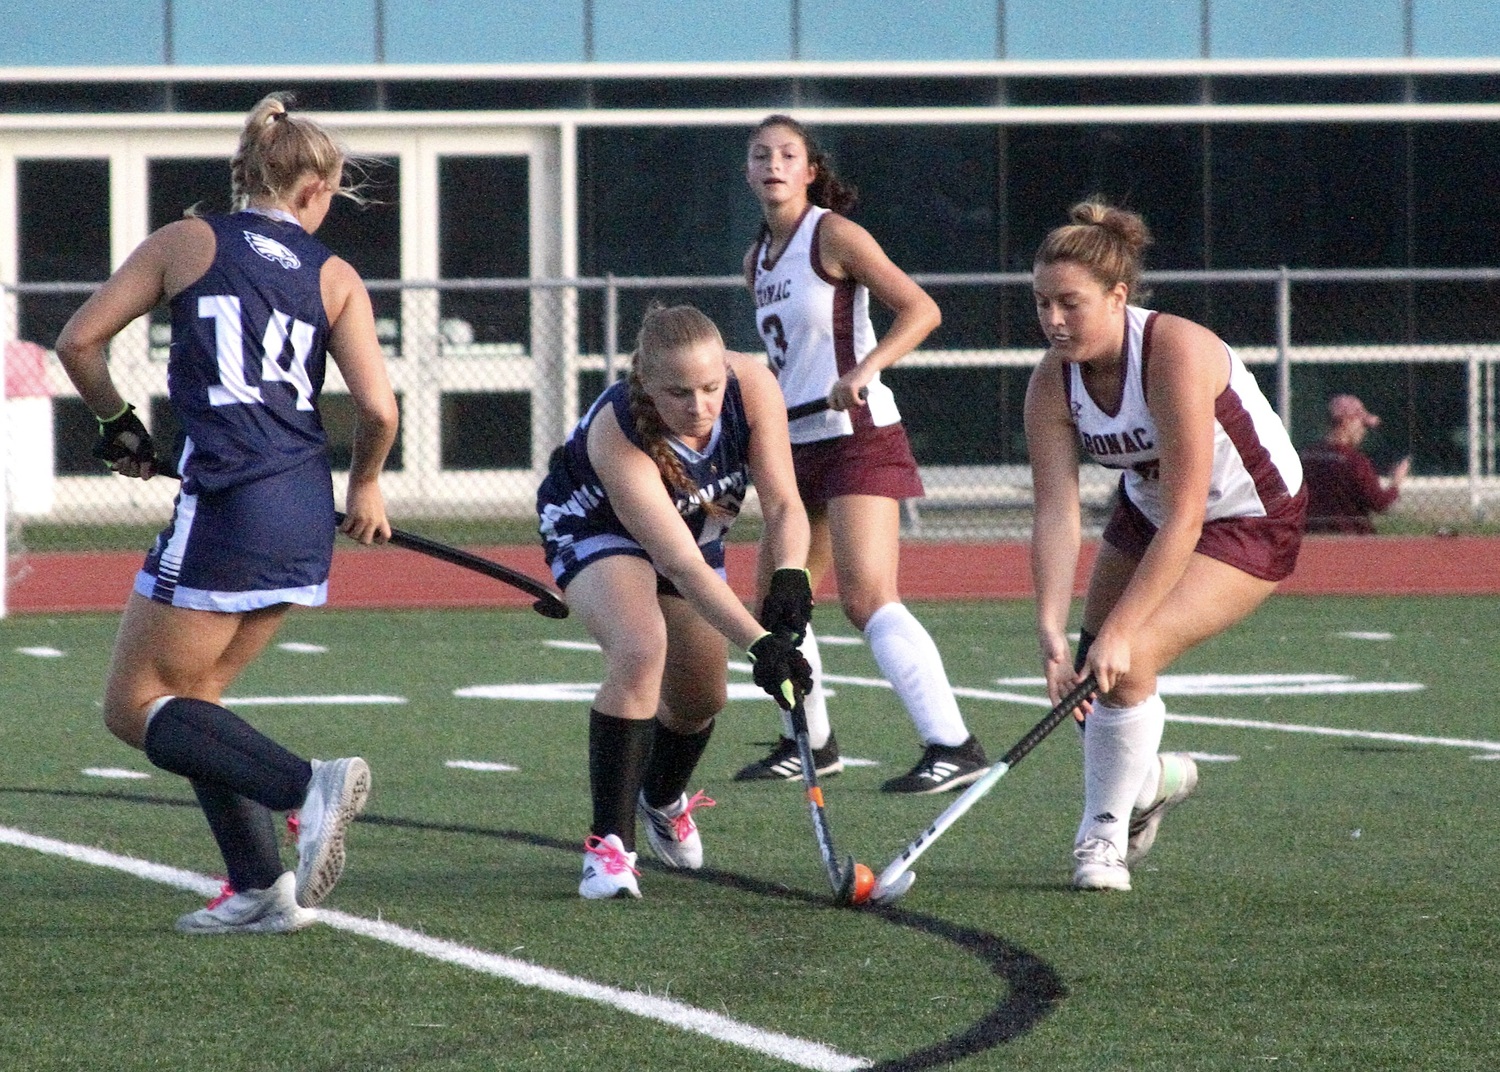 Junior defender and midfielder Ava Walters reaches for the ball. DESIRÉE KEEGAN